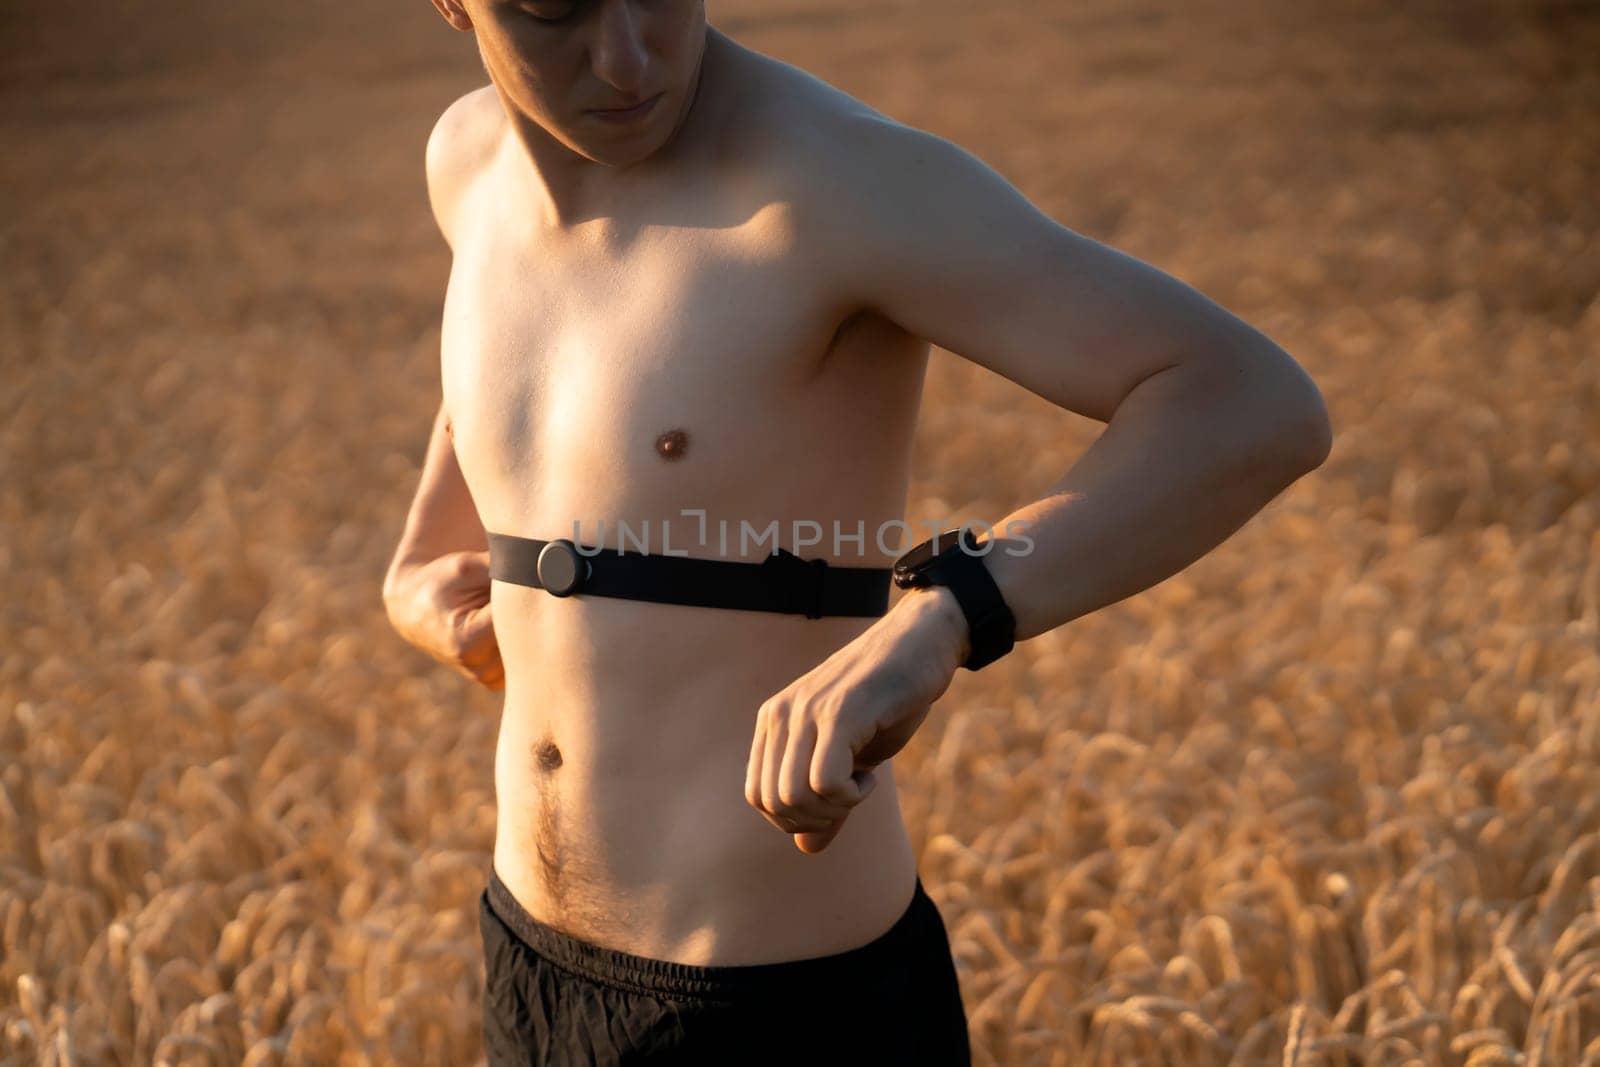 An athletic young man warms up outdoors, puts on a heart rate monitor and prepares for an active run, a person leads a healthy lifestyle and competently approaches running training.